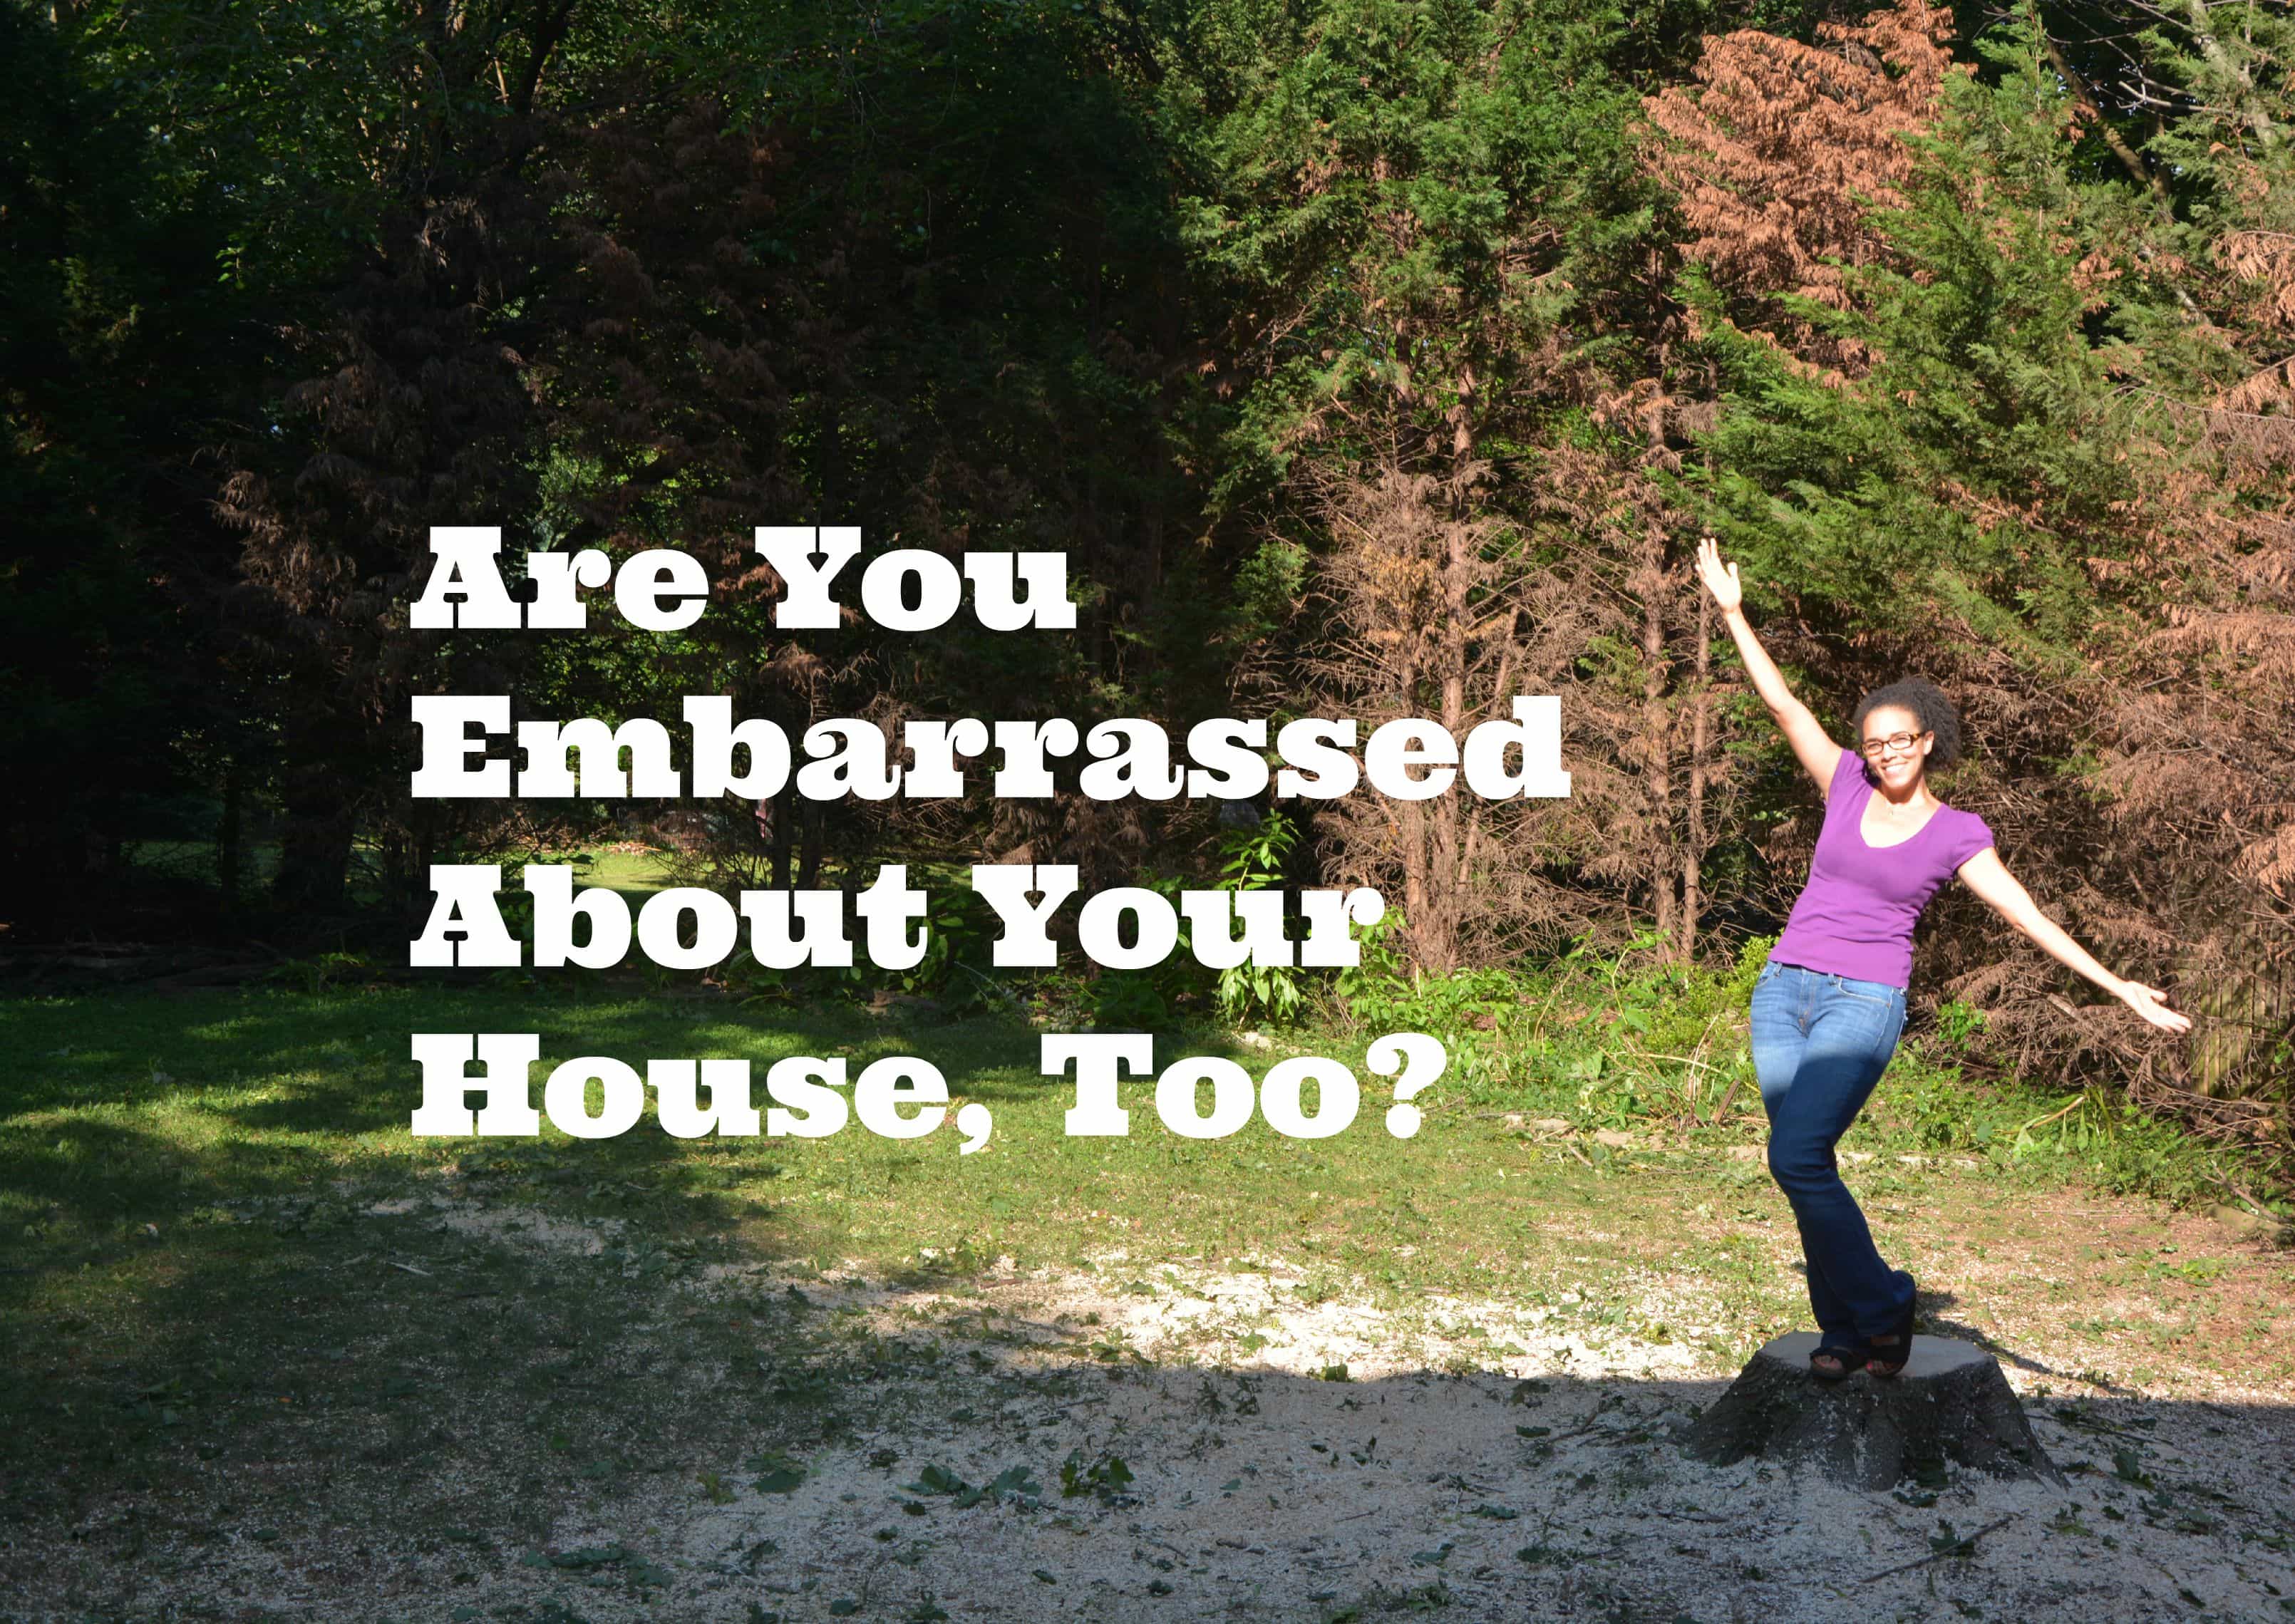 Are You Embarrassed About Your House, Too?